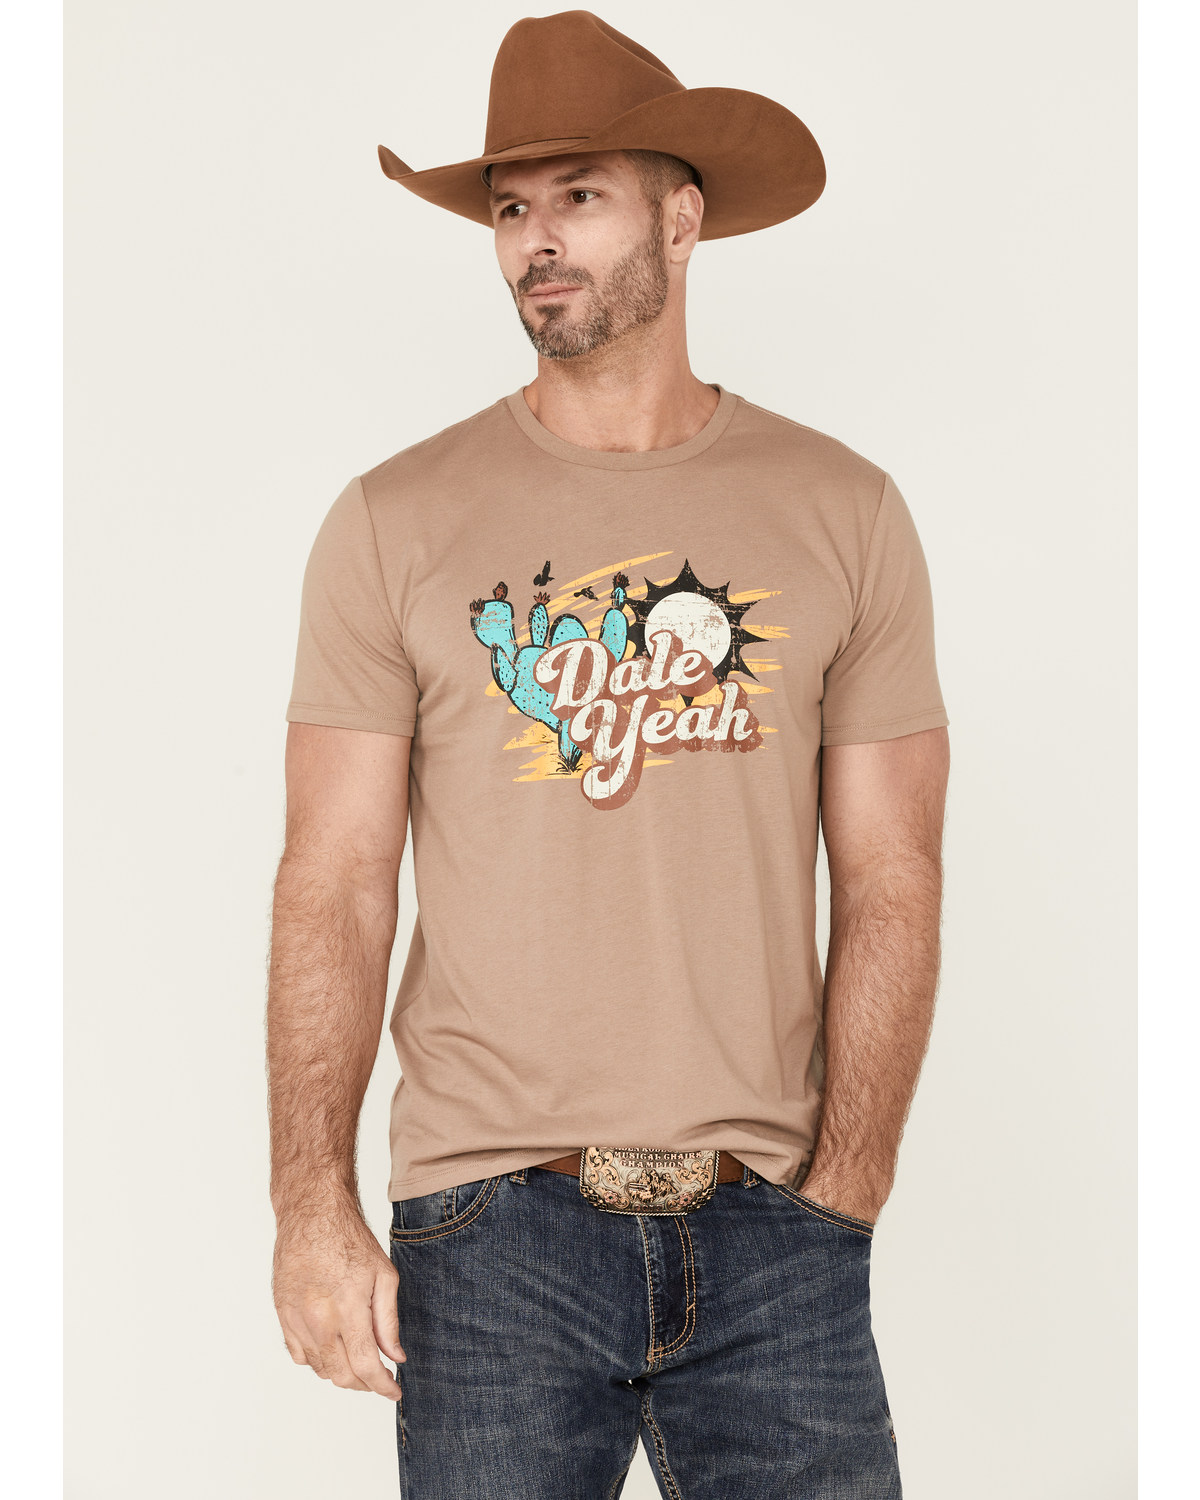 Dale Brisby Men's Yeah Graphic Short Sleeve T-Shirt